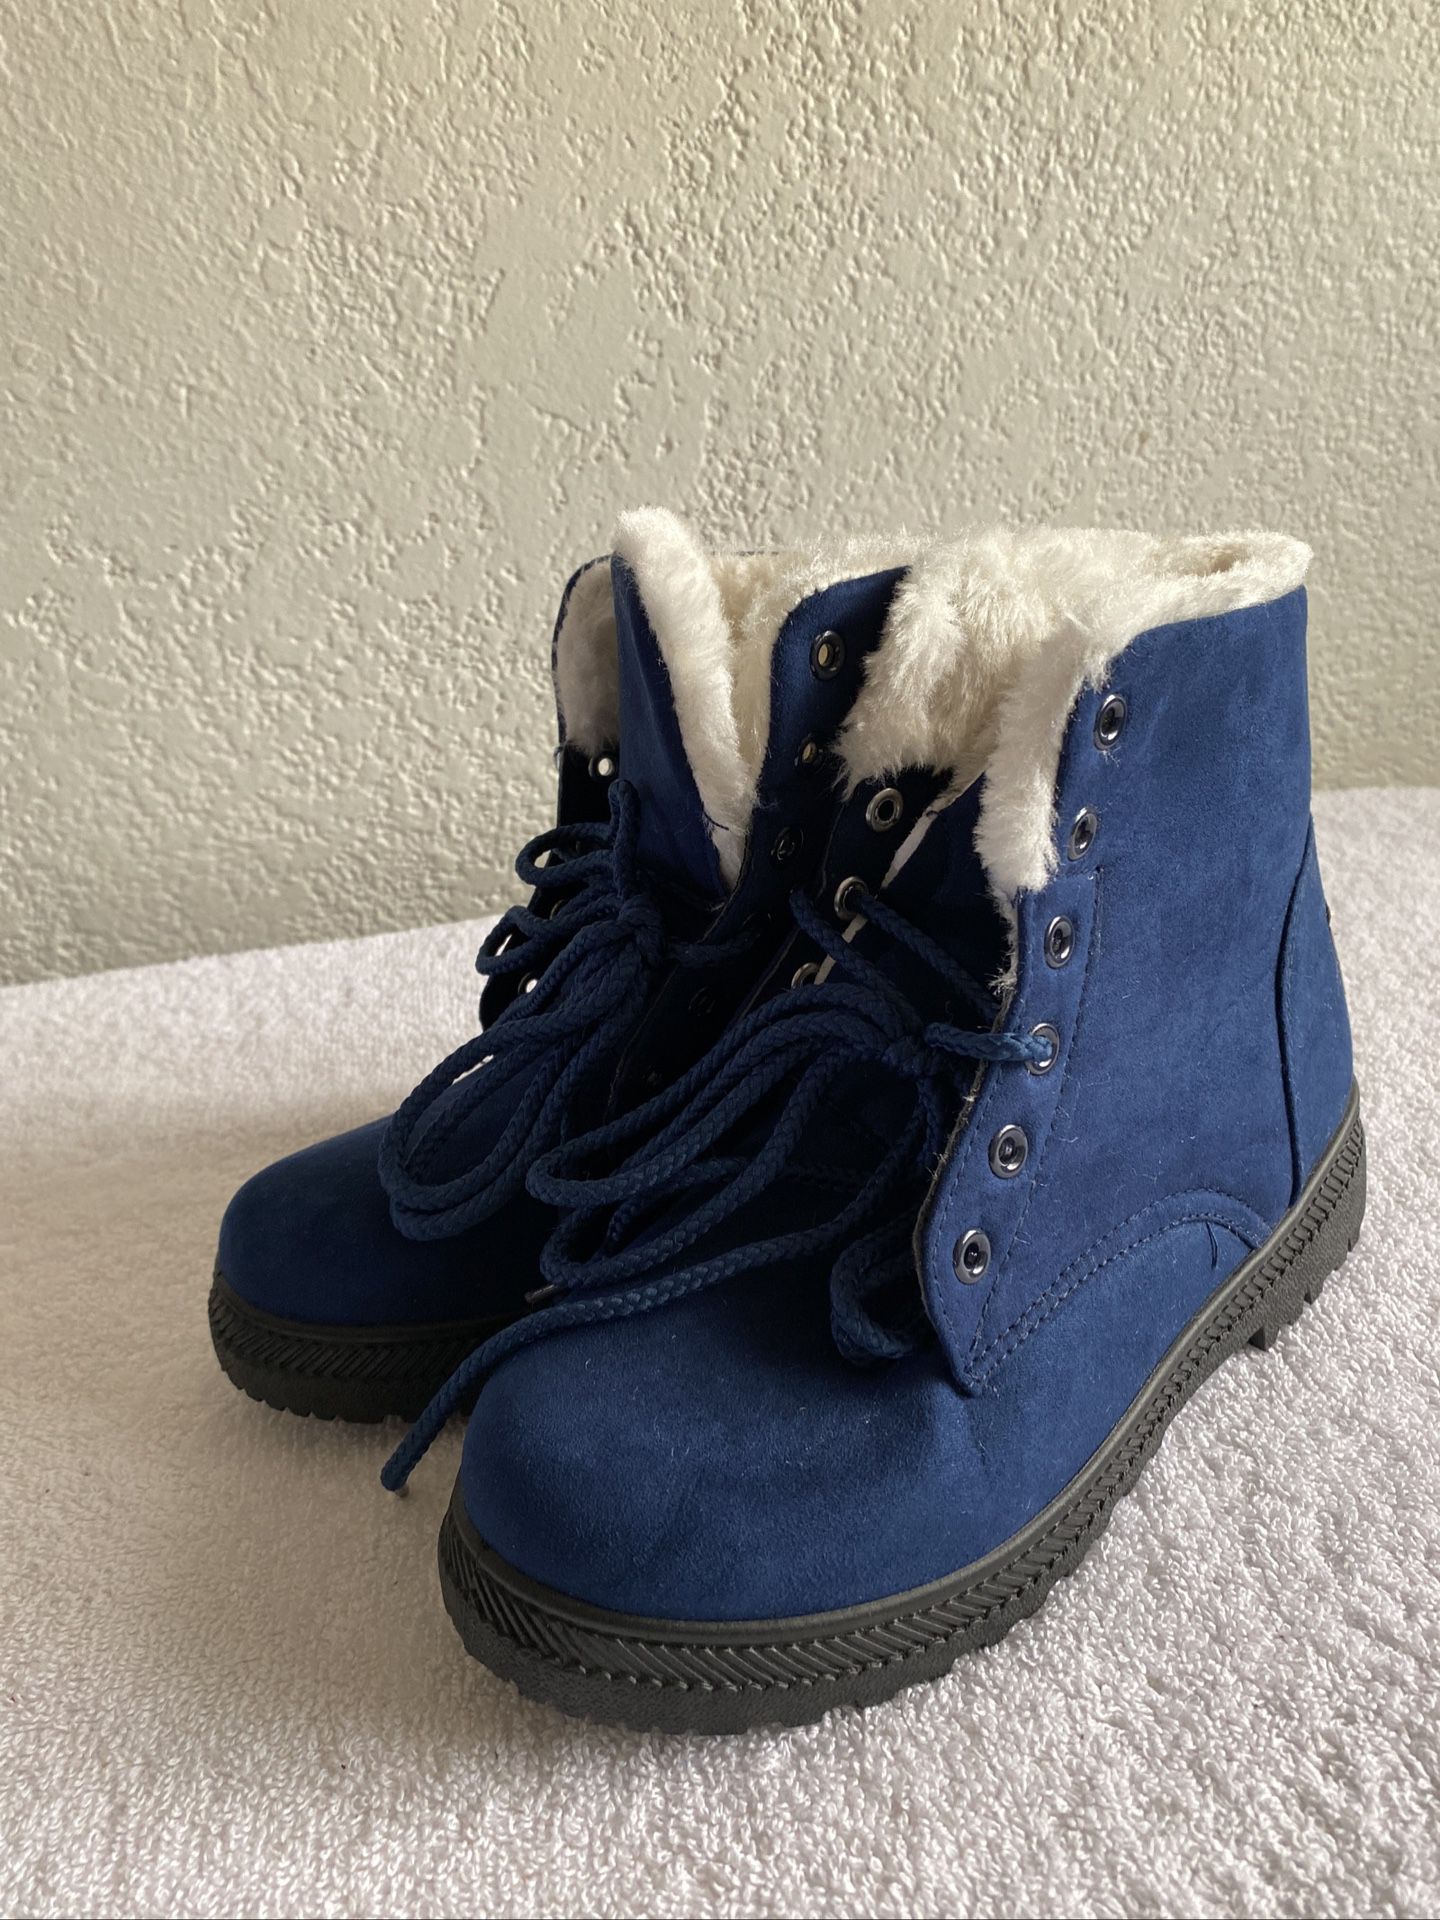 SQL Winter Snow Boots for Women BLUE Suede Fur Lined Ankle Boots US 6 EU 36